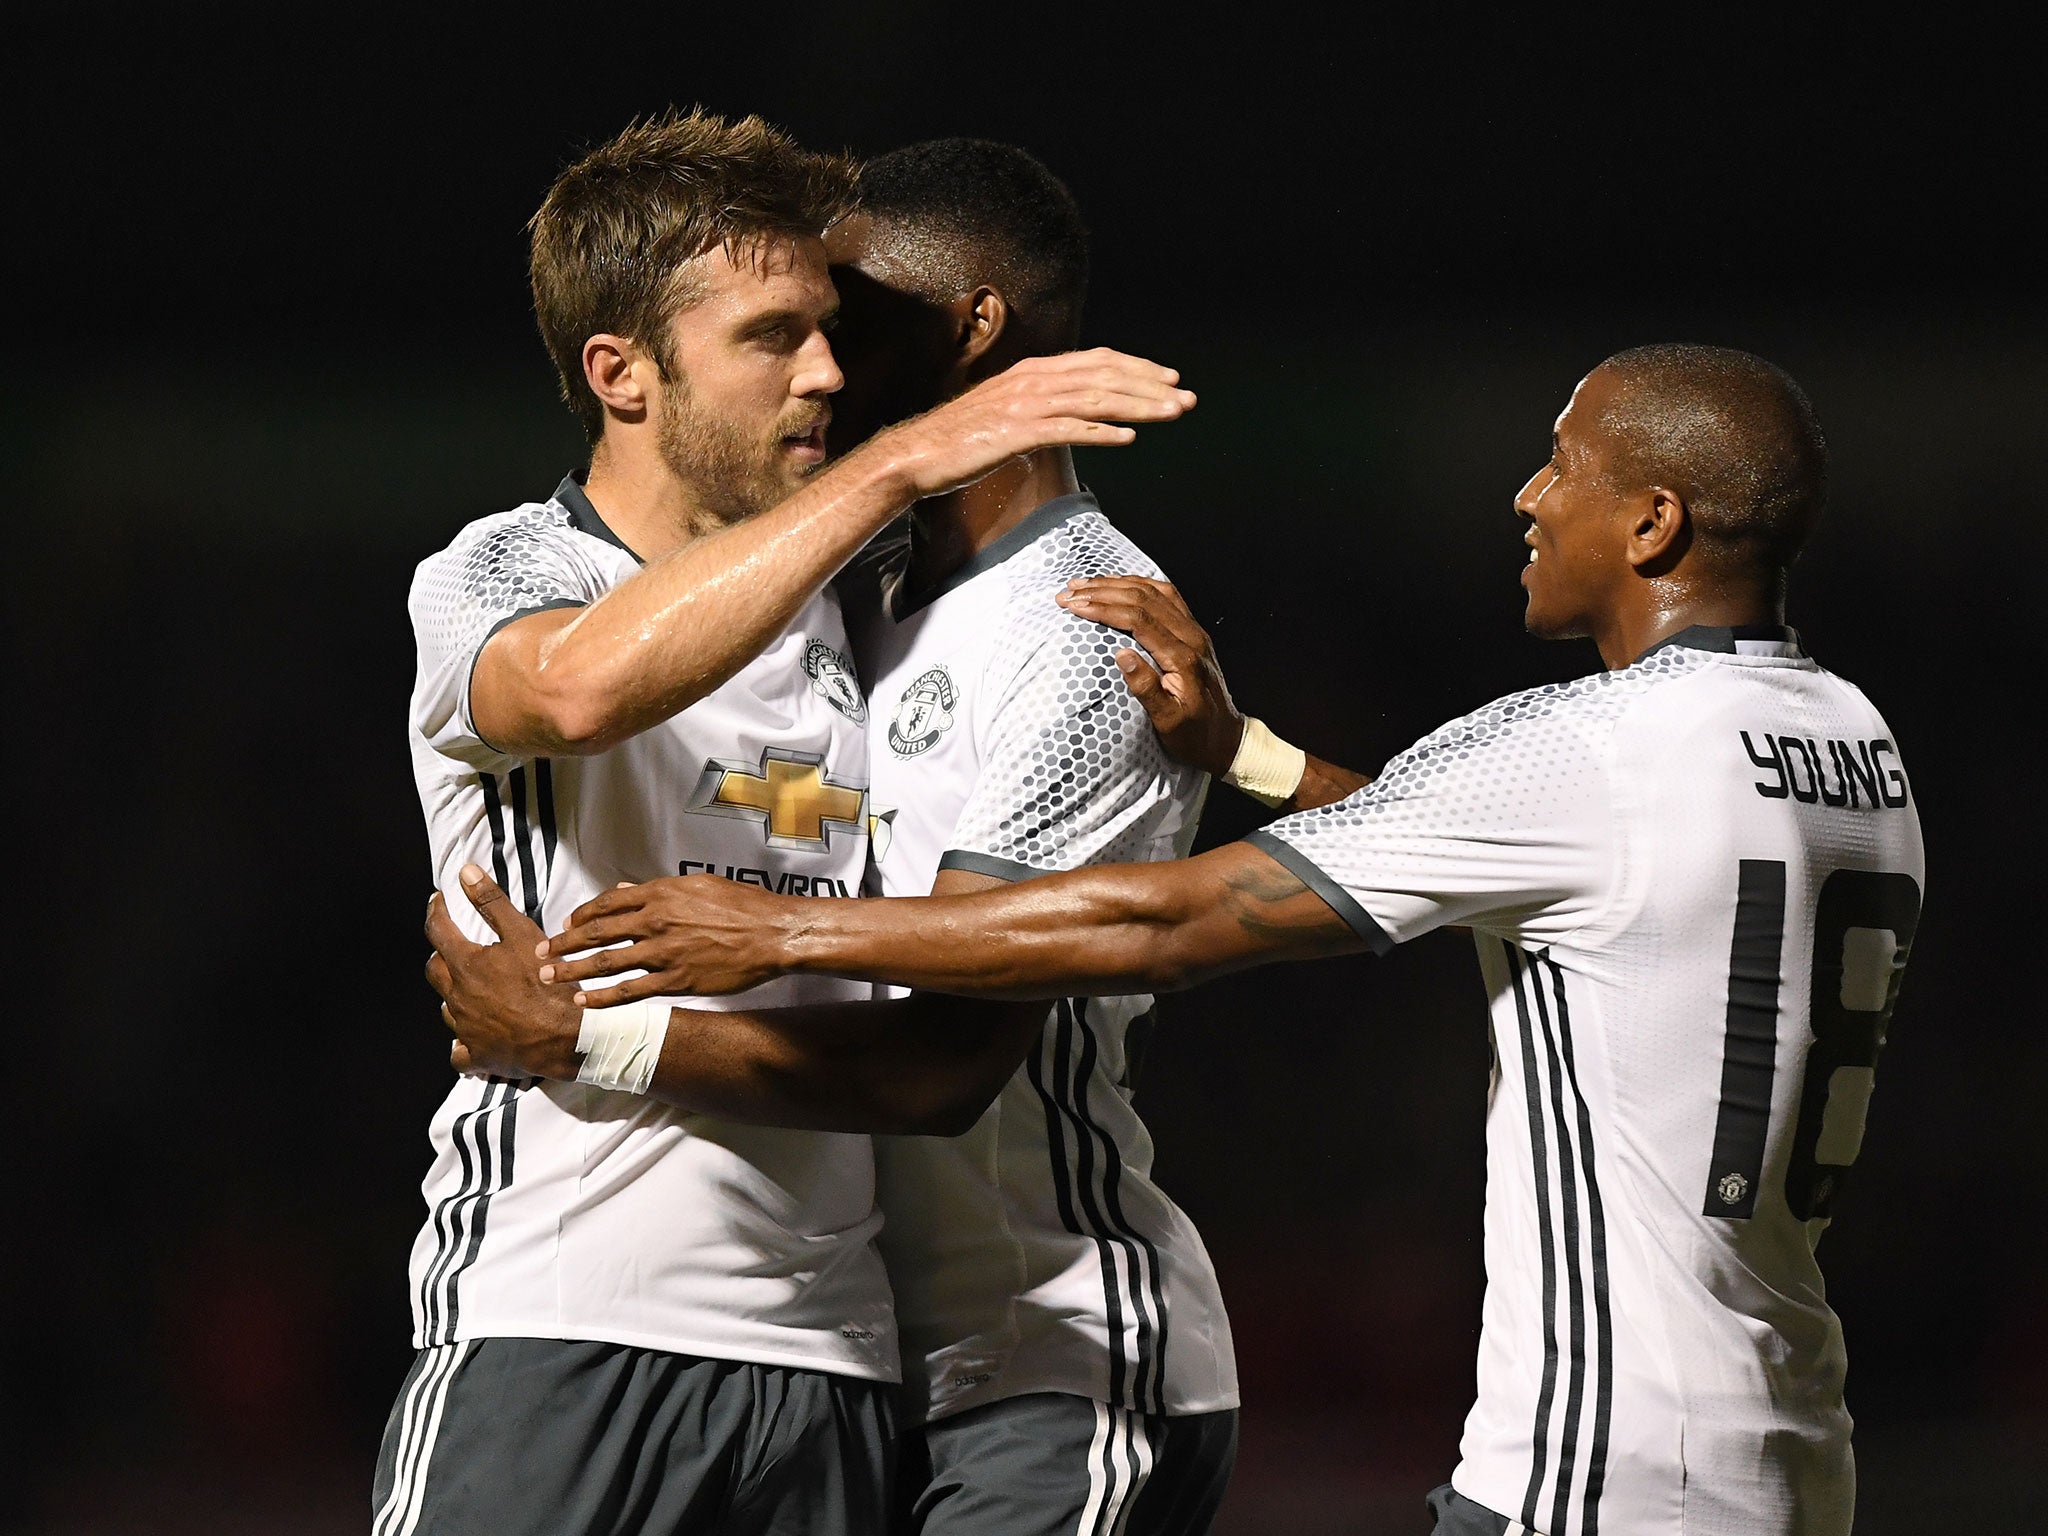 Michael Carrick impressed for the visitors